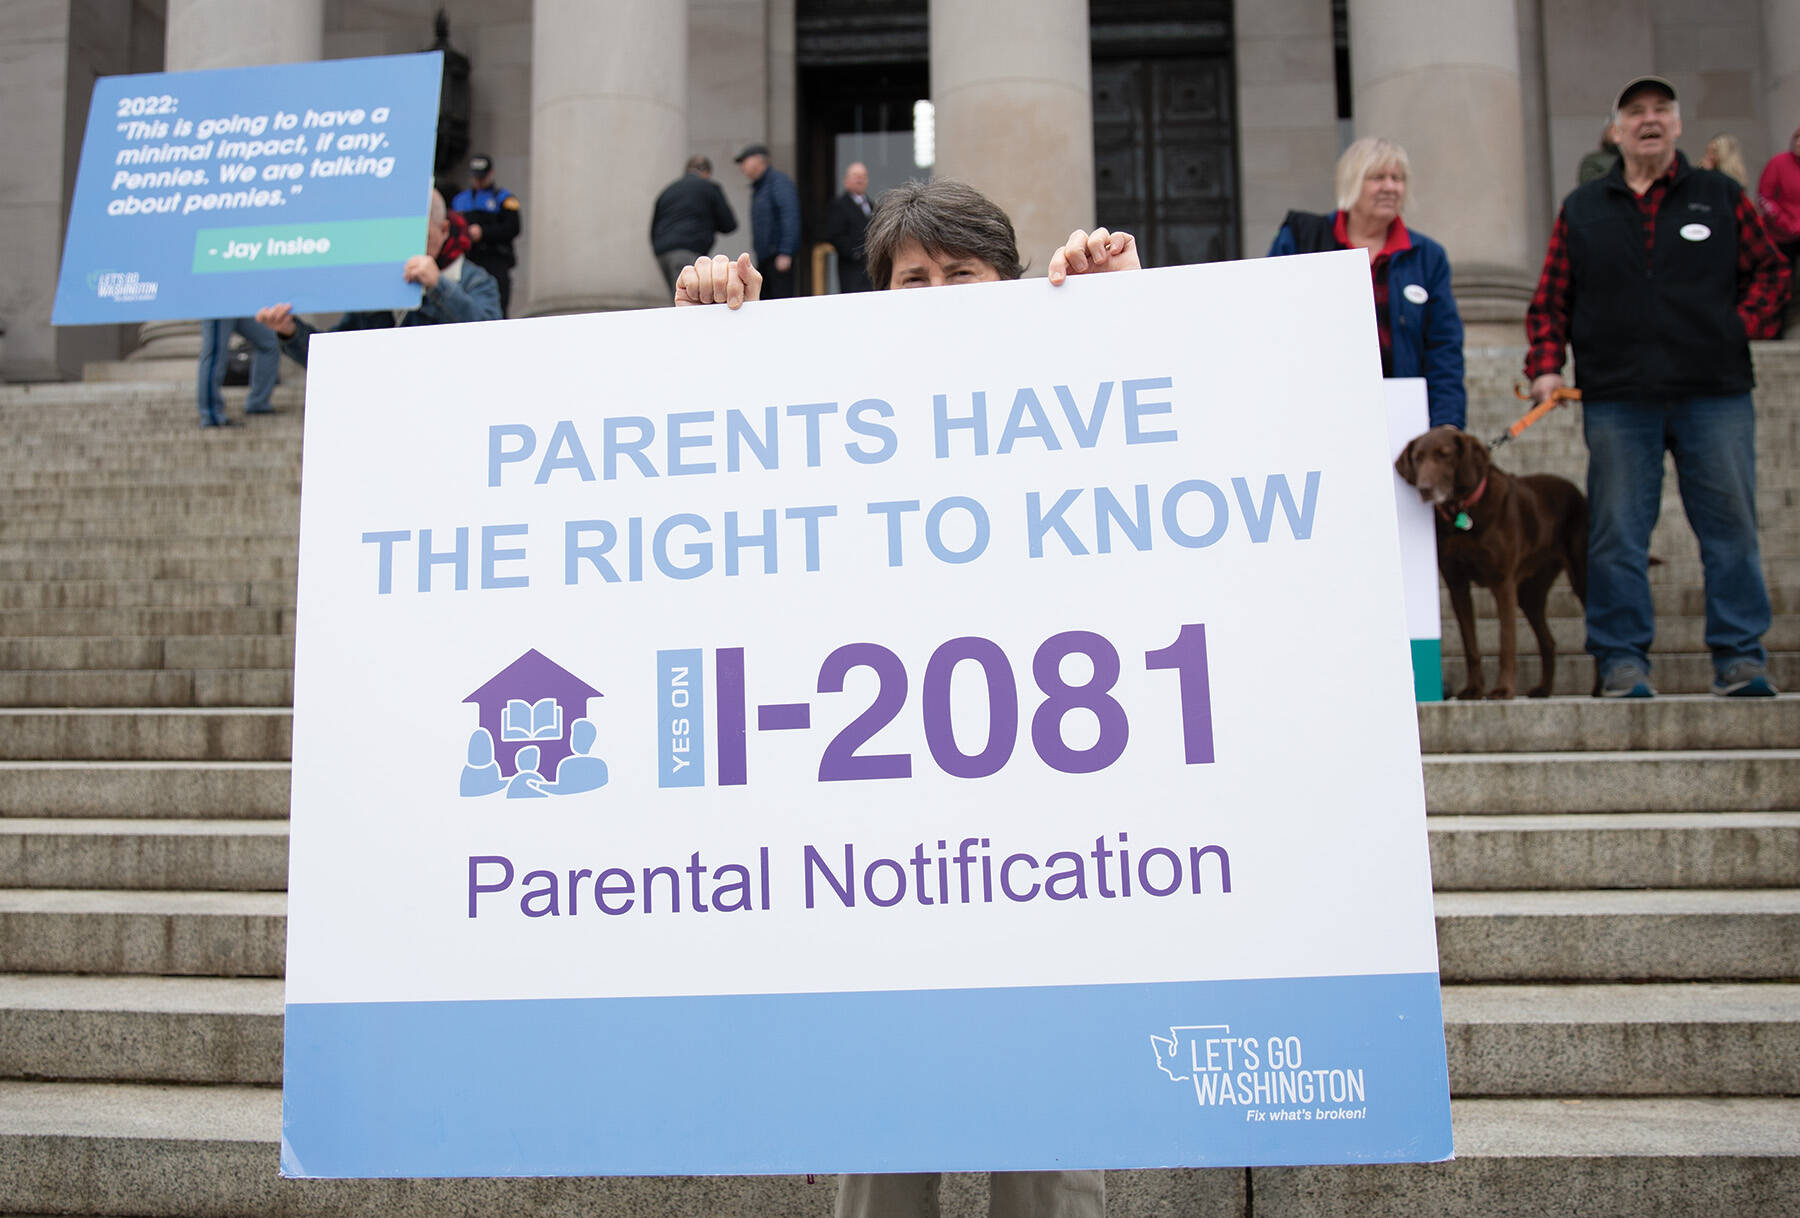 Photo by Mary Murphy
Demonstrators carry signs calling for passage of a parental notification initiative during a protest in Olympia. The initiative was approved by the Legislature.